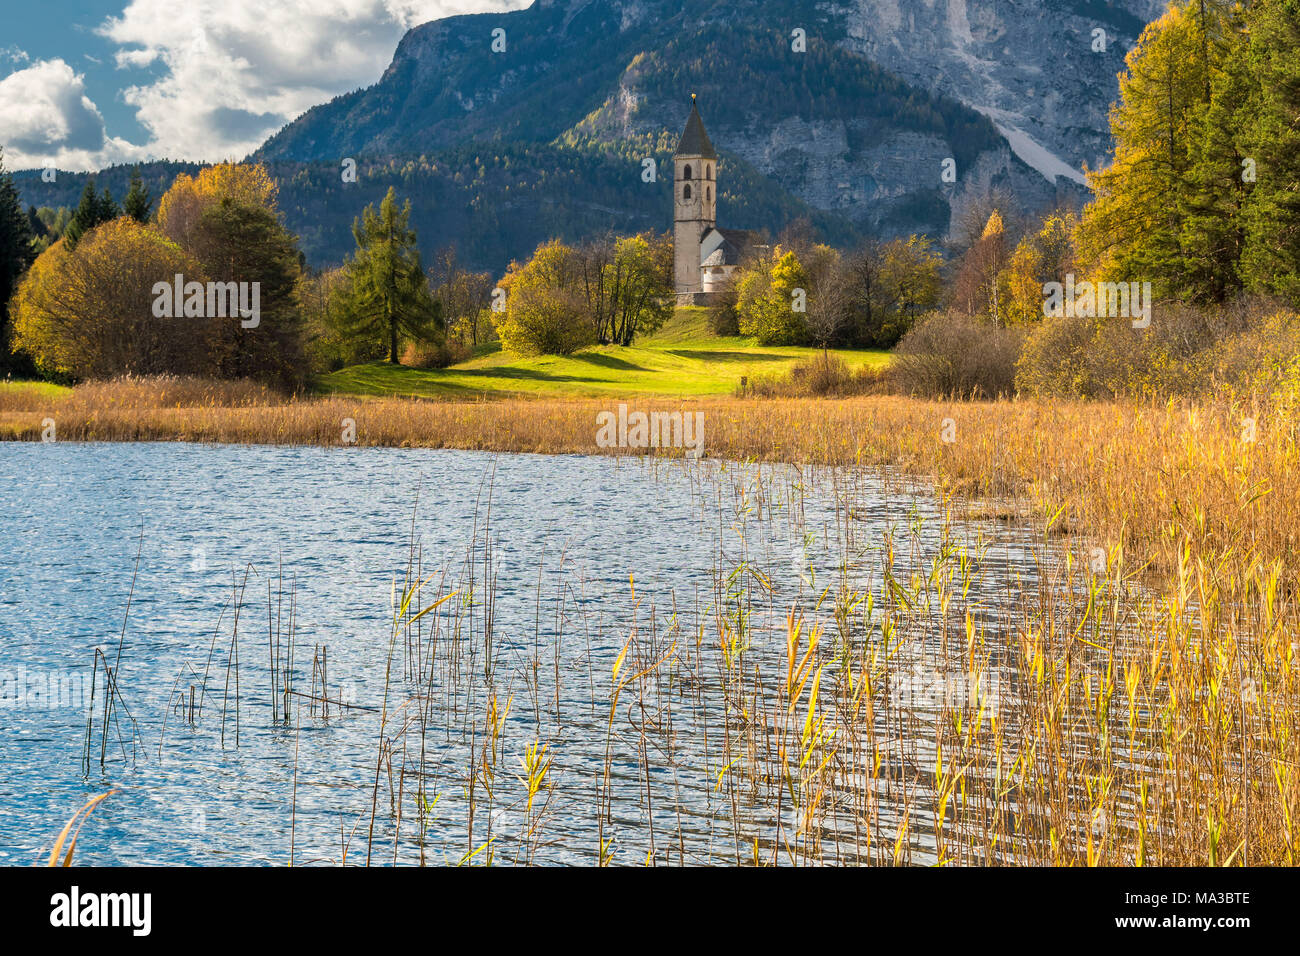 Favogna / Unterfennberg, Magrè / Margreid, province of Bolzano, South Tyrol, Italy, Europe. The lake Favogna and the church 'Mary Help of Christians' Stock Photo